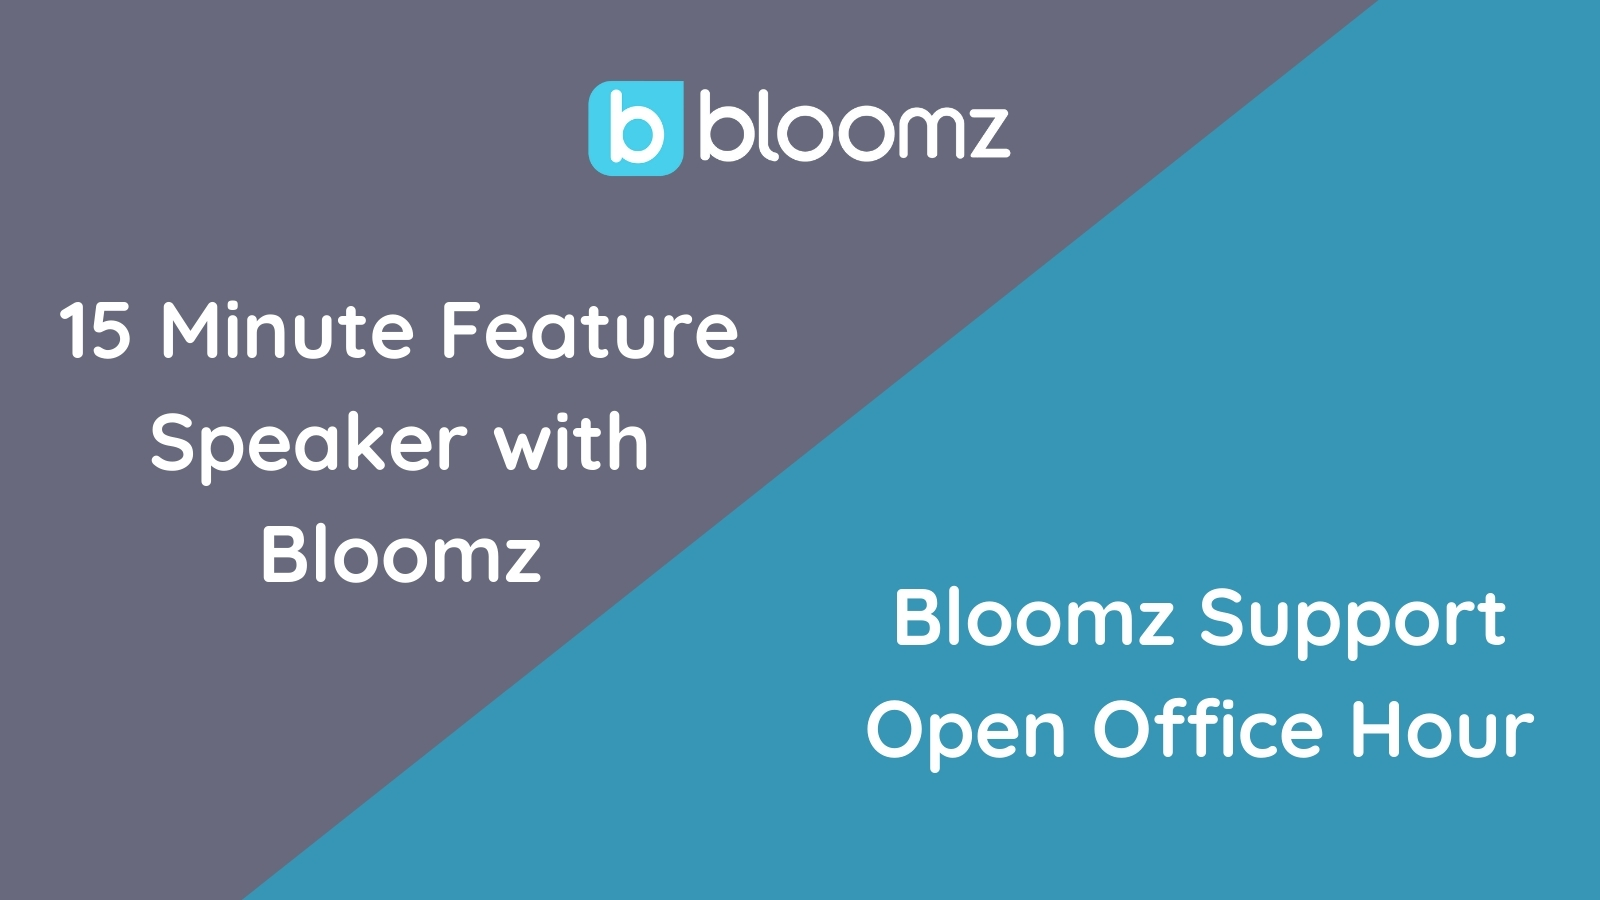 Two New Ways to Learn More about Bloomz!